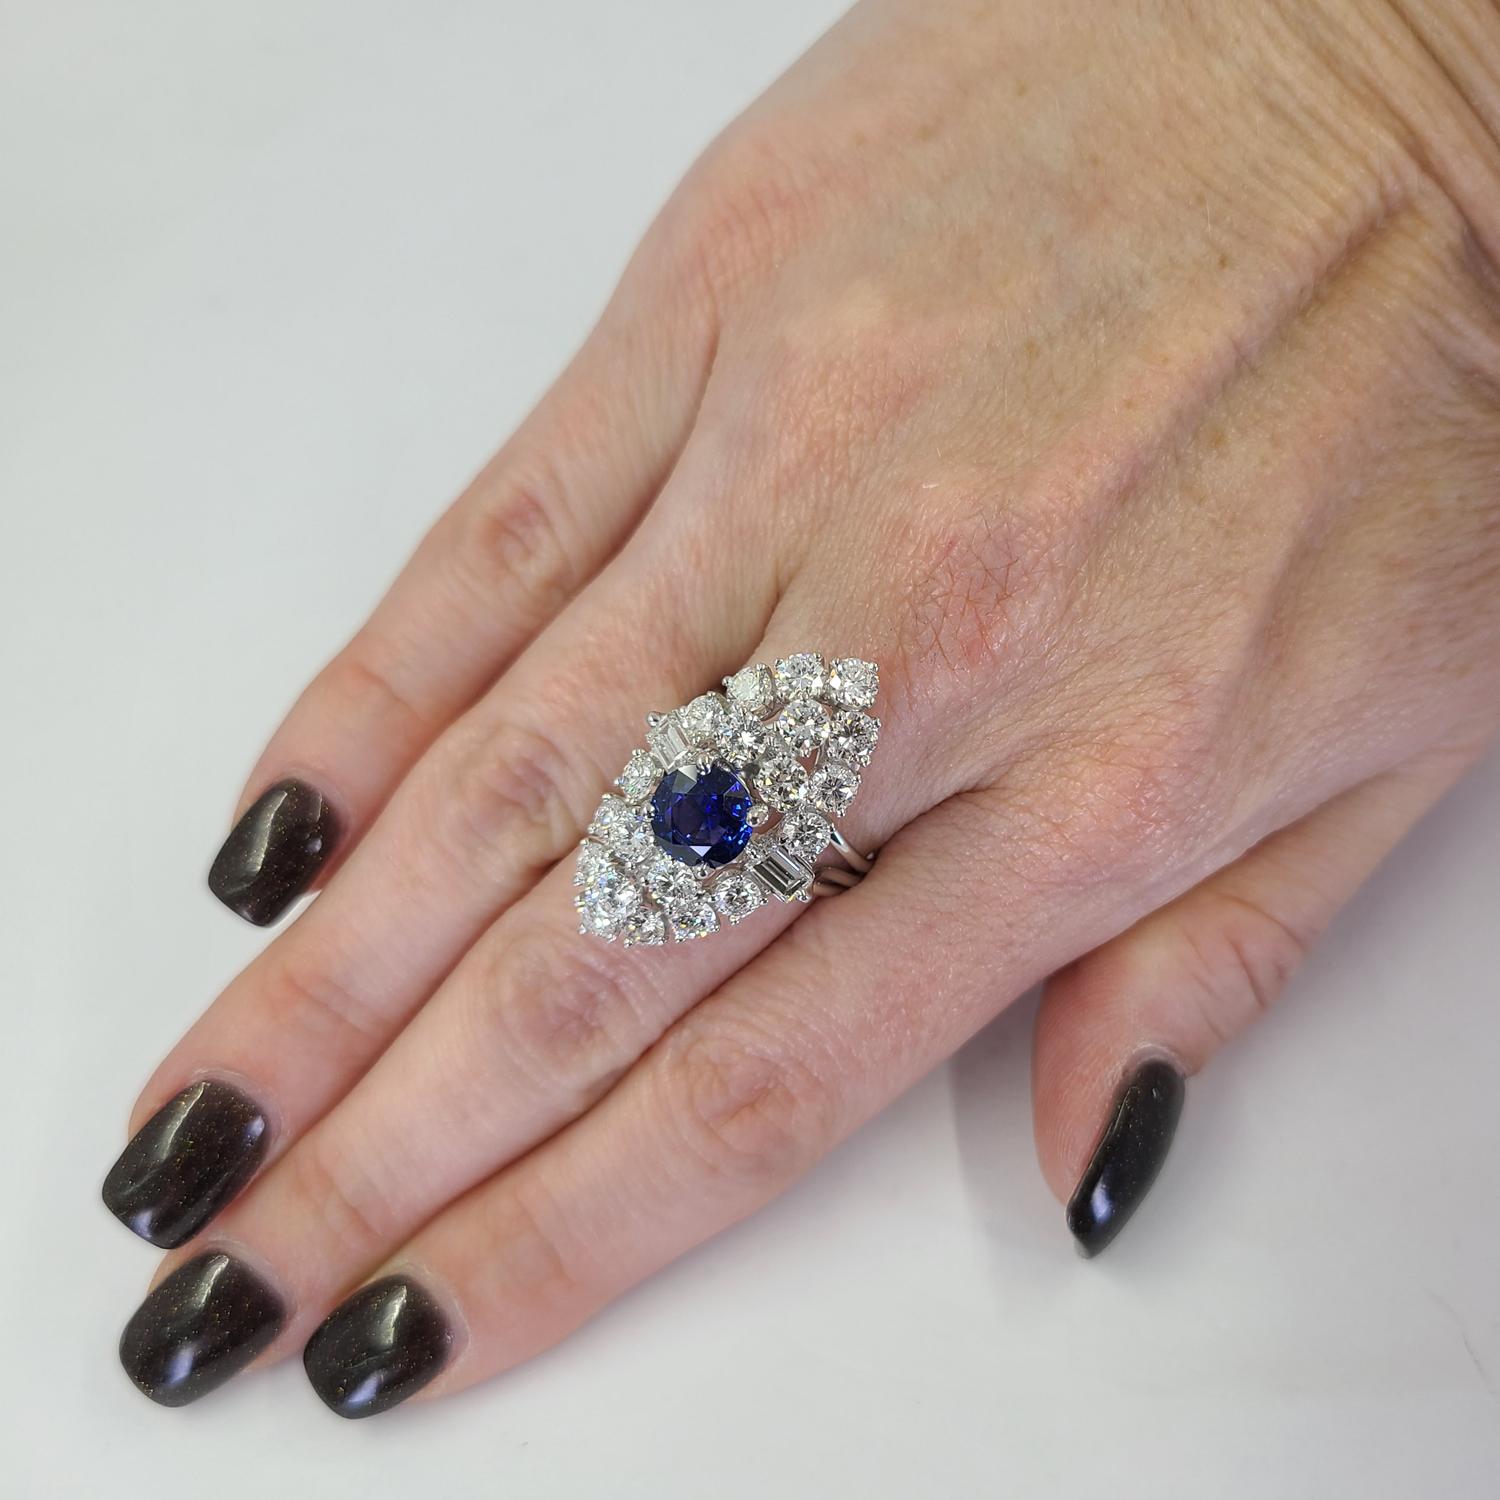 Platinum Vintage Dinner Ring Featuring A 2.00 Carat Round Sapphire Accented By 22 Round & Baguette Cut Diamonds Of VS Clarity & G Color Totaling Approximately 3.50 Carats. Finger Size 6; Purchase Includes One Sizing Service. Finished Weight Is 13